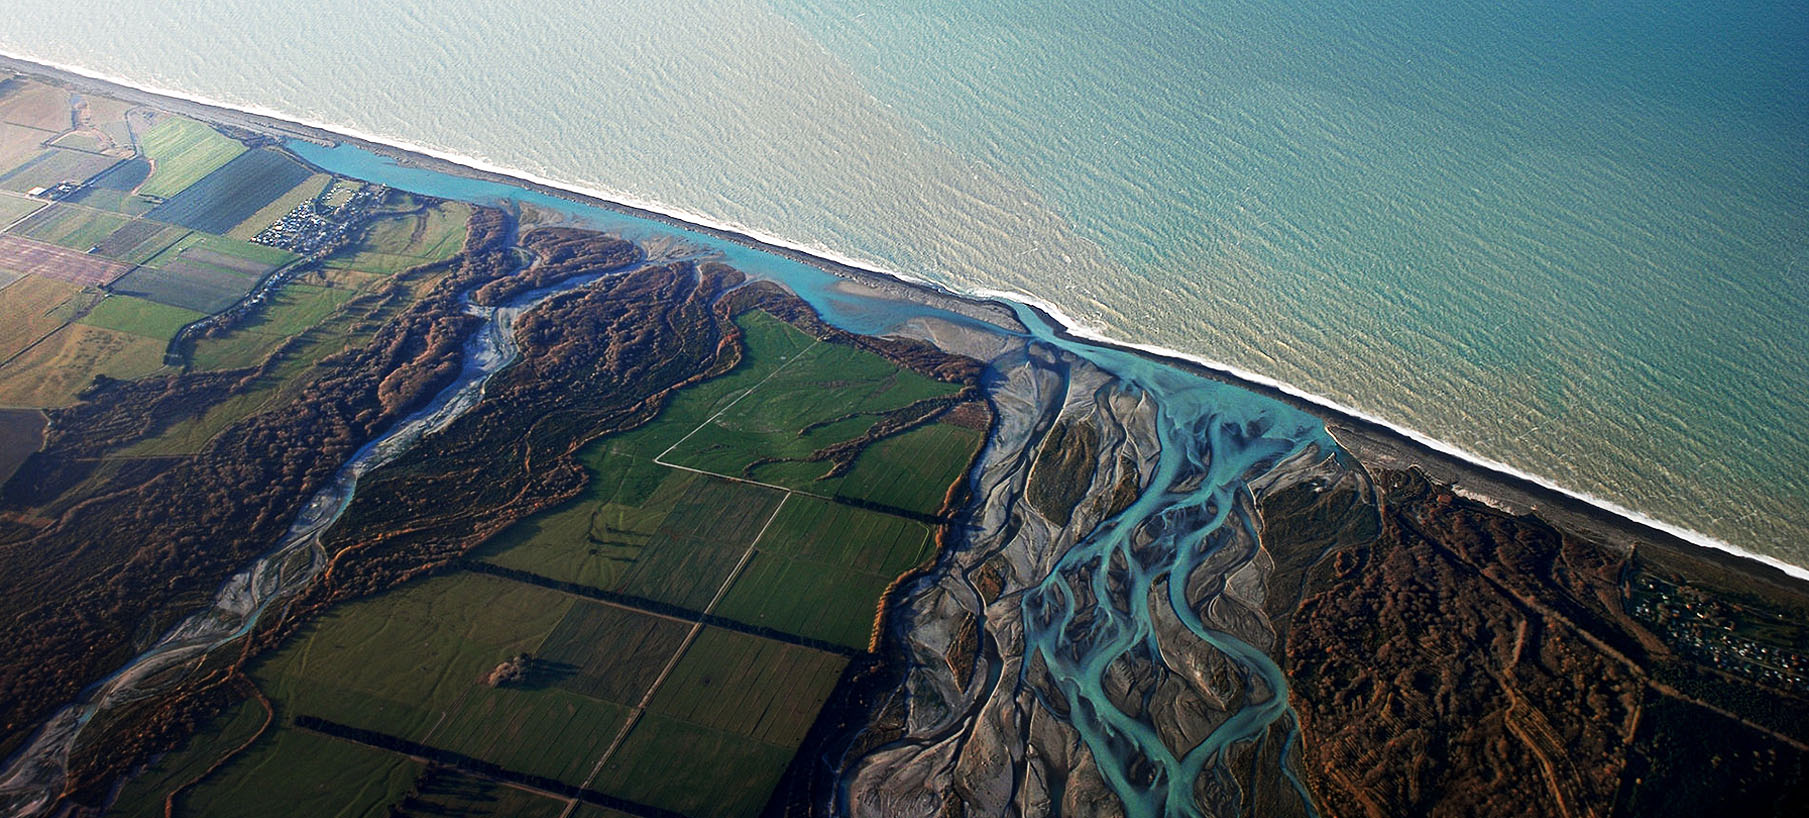 Fig. 1: Rakaia River hapua visible as a long thin blue lagoon along the coast. The northern arm of the Rakaia River flows directly into the hapua, while the Southern (wider) arm also stretches along the coast at the rivermouth before opening to the sea. This configuration is highly dynamic and can change at any time during storms or floods. (Image: Phillip Capper | Wikipedia Commons)